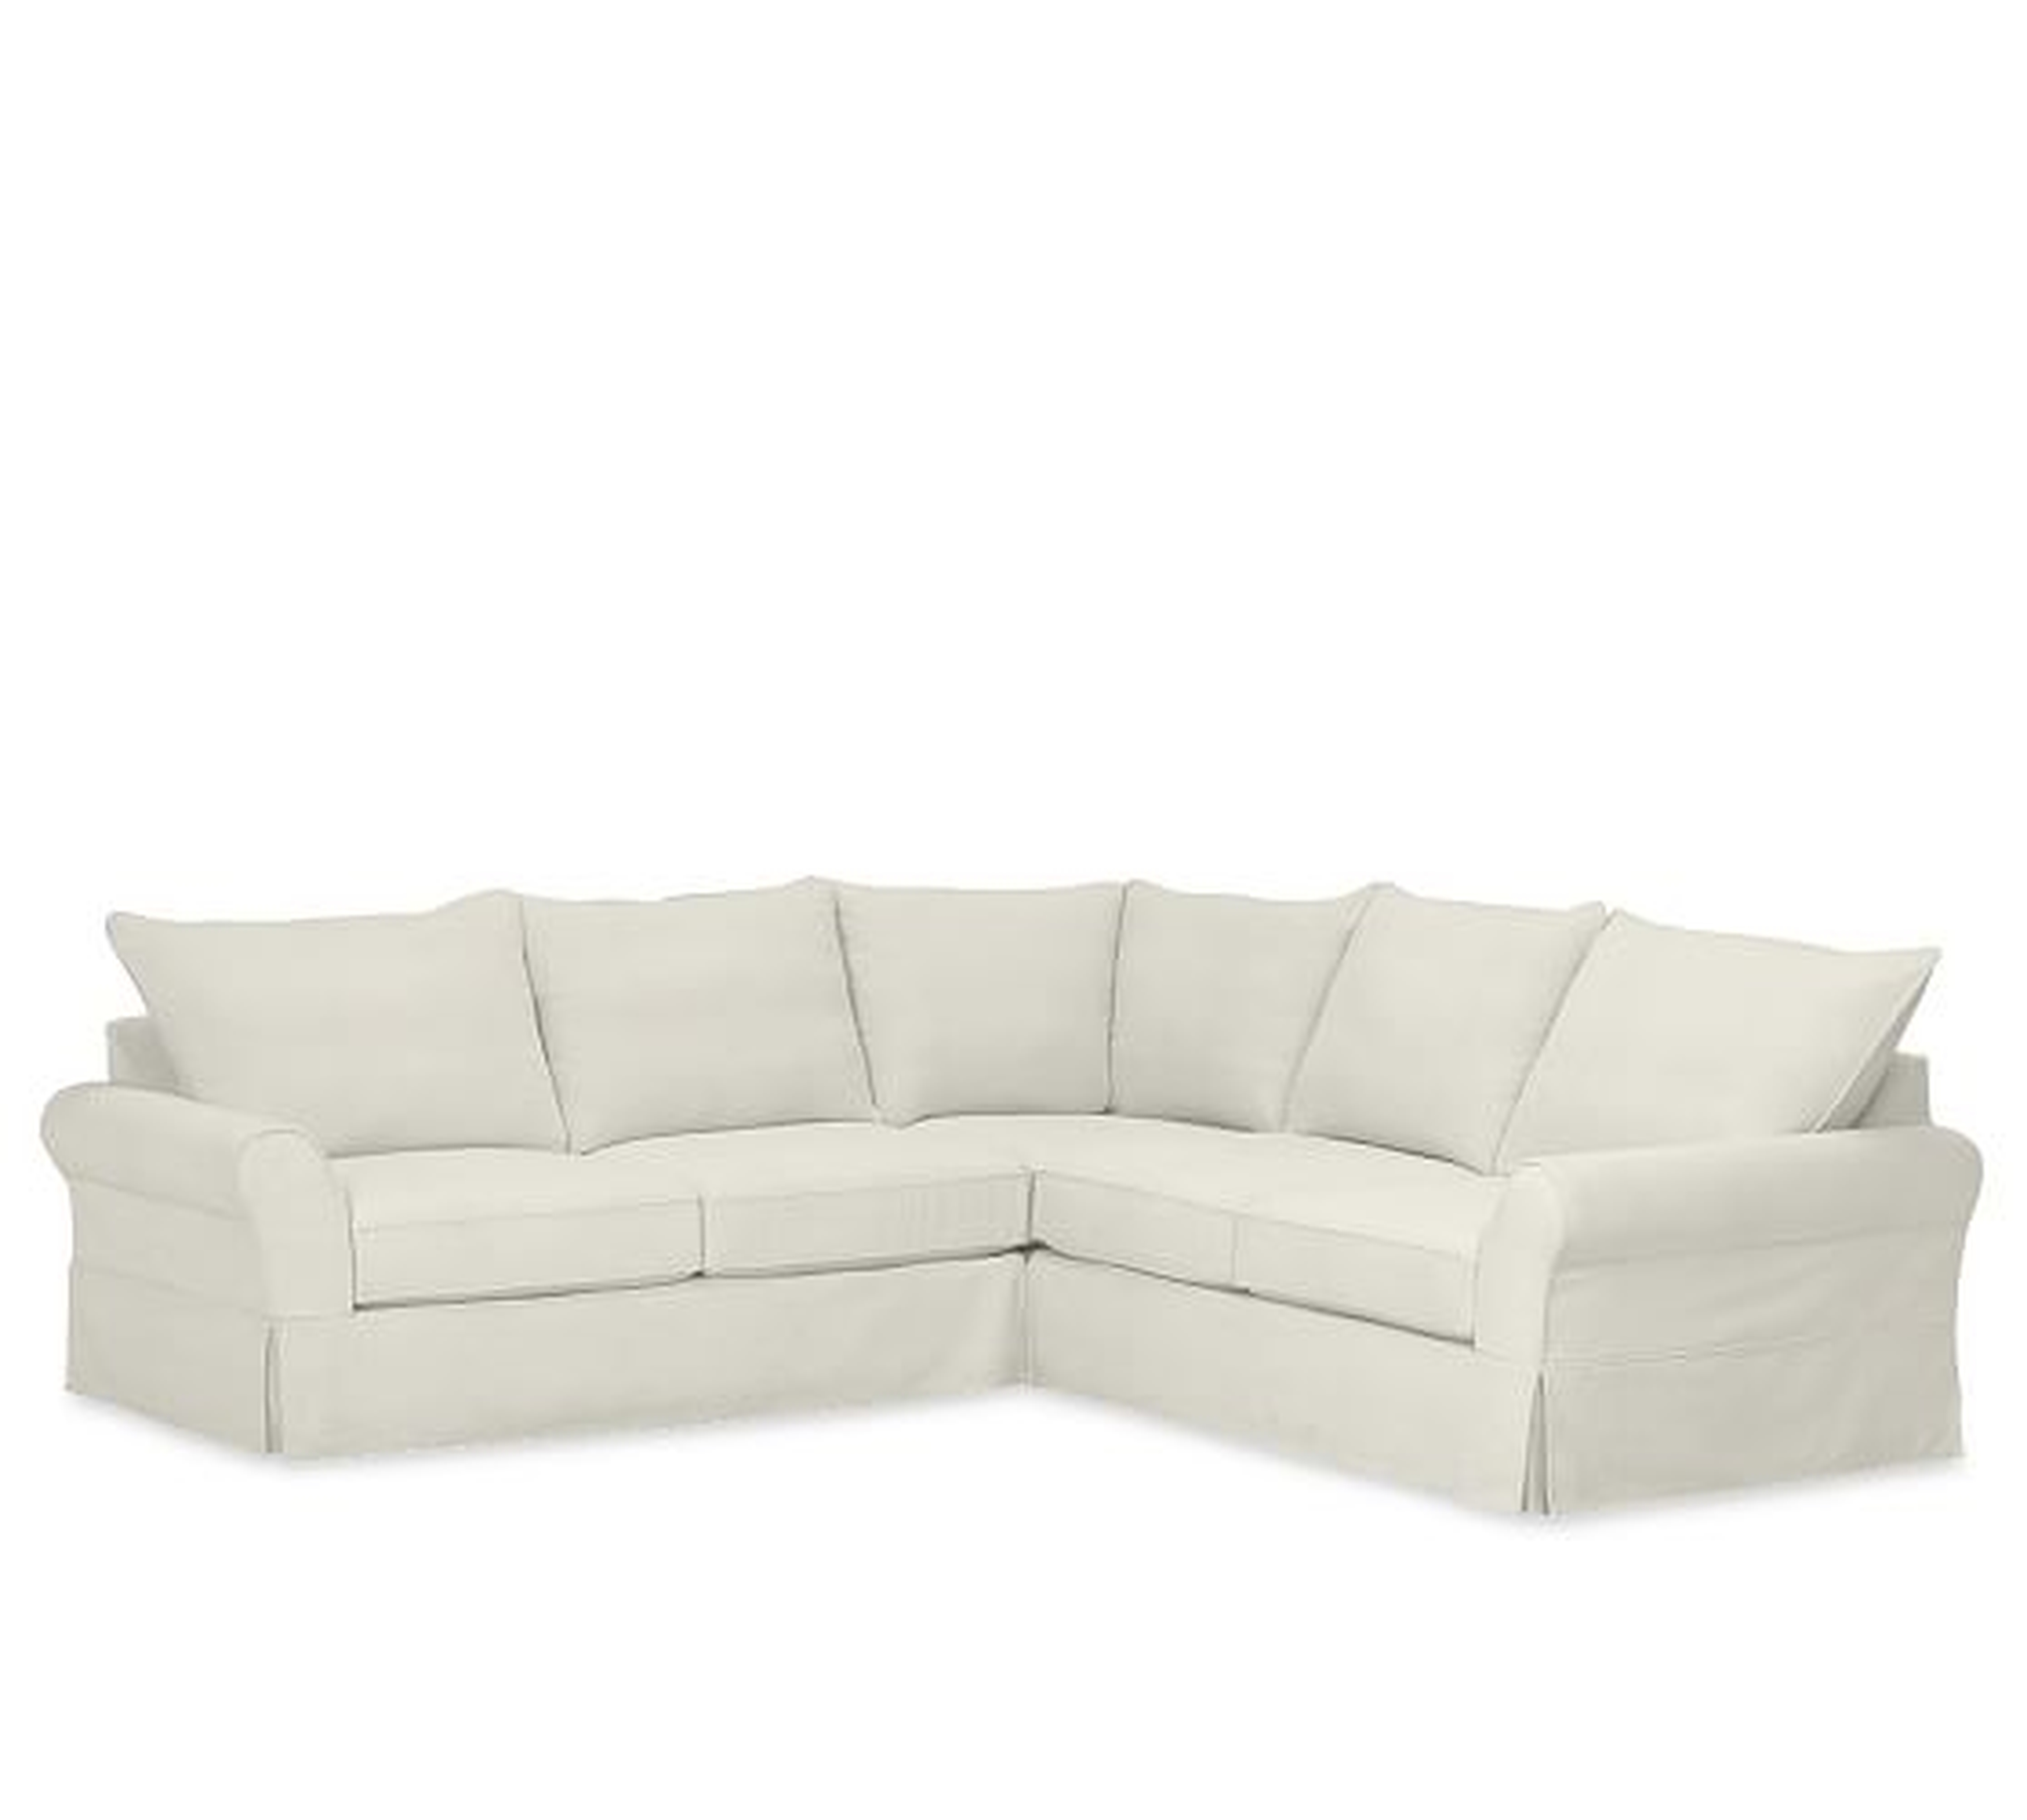 PB COMFORT ROLL ARM SLIPCOVERED 3-PIECE L-SHAPED SECTIONAL WITH CORNER - Pottery Barn